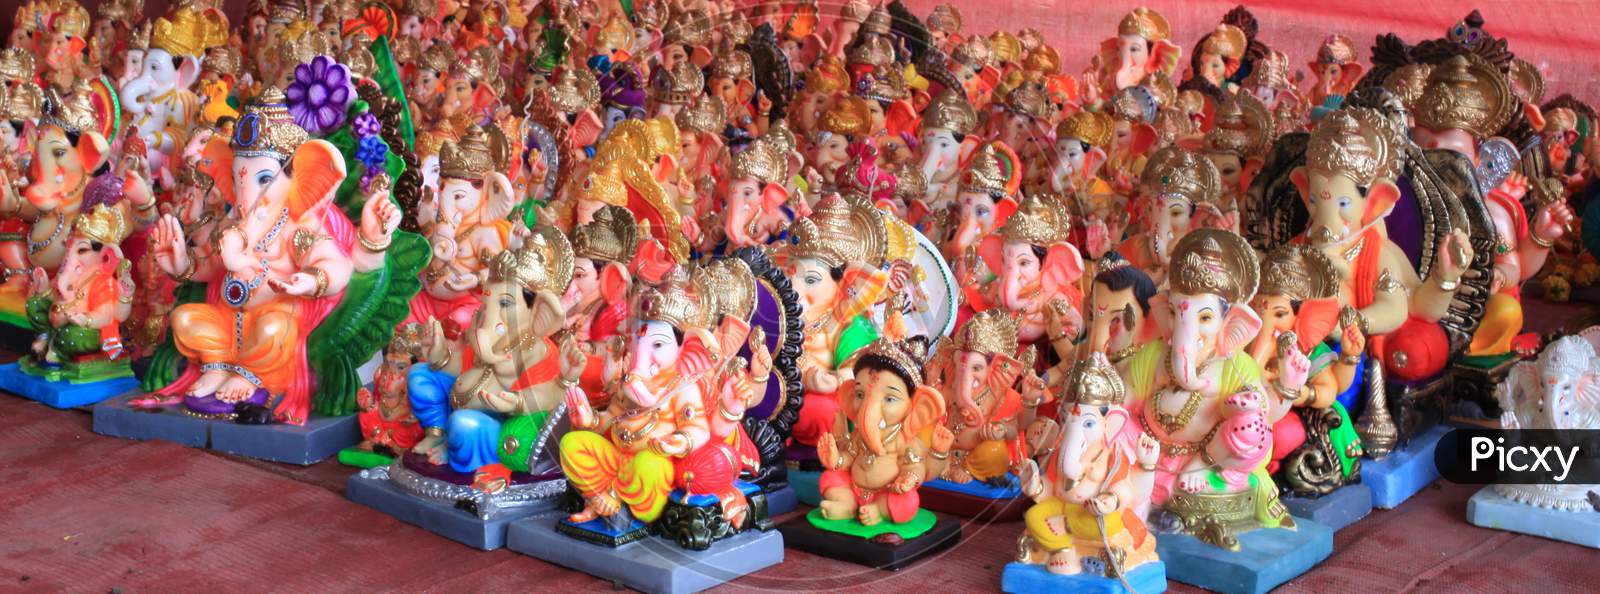 Idols Of Lord Ganesha Gathered Together After The Annual Immersion Ceremony.